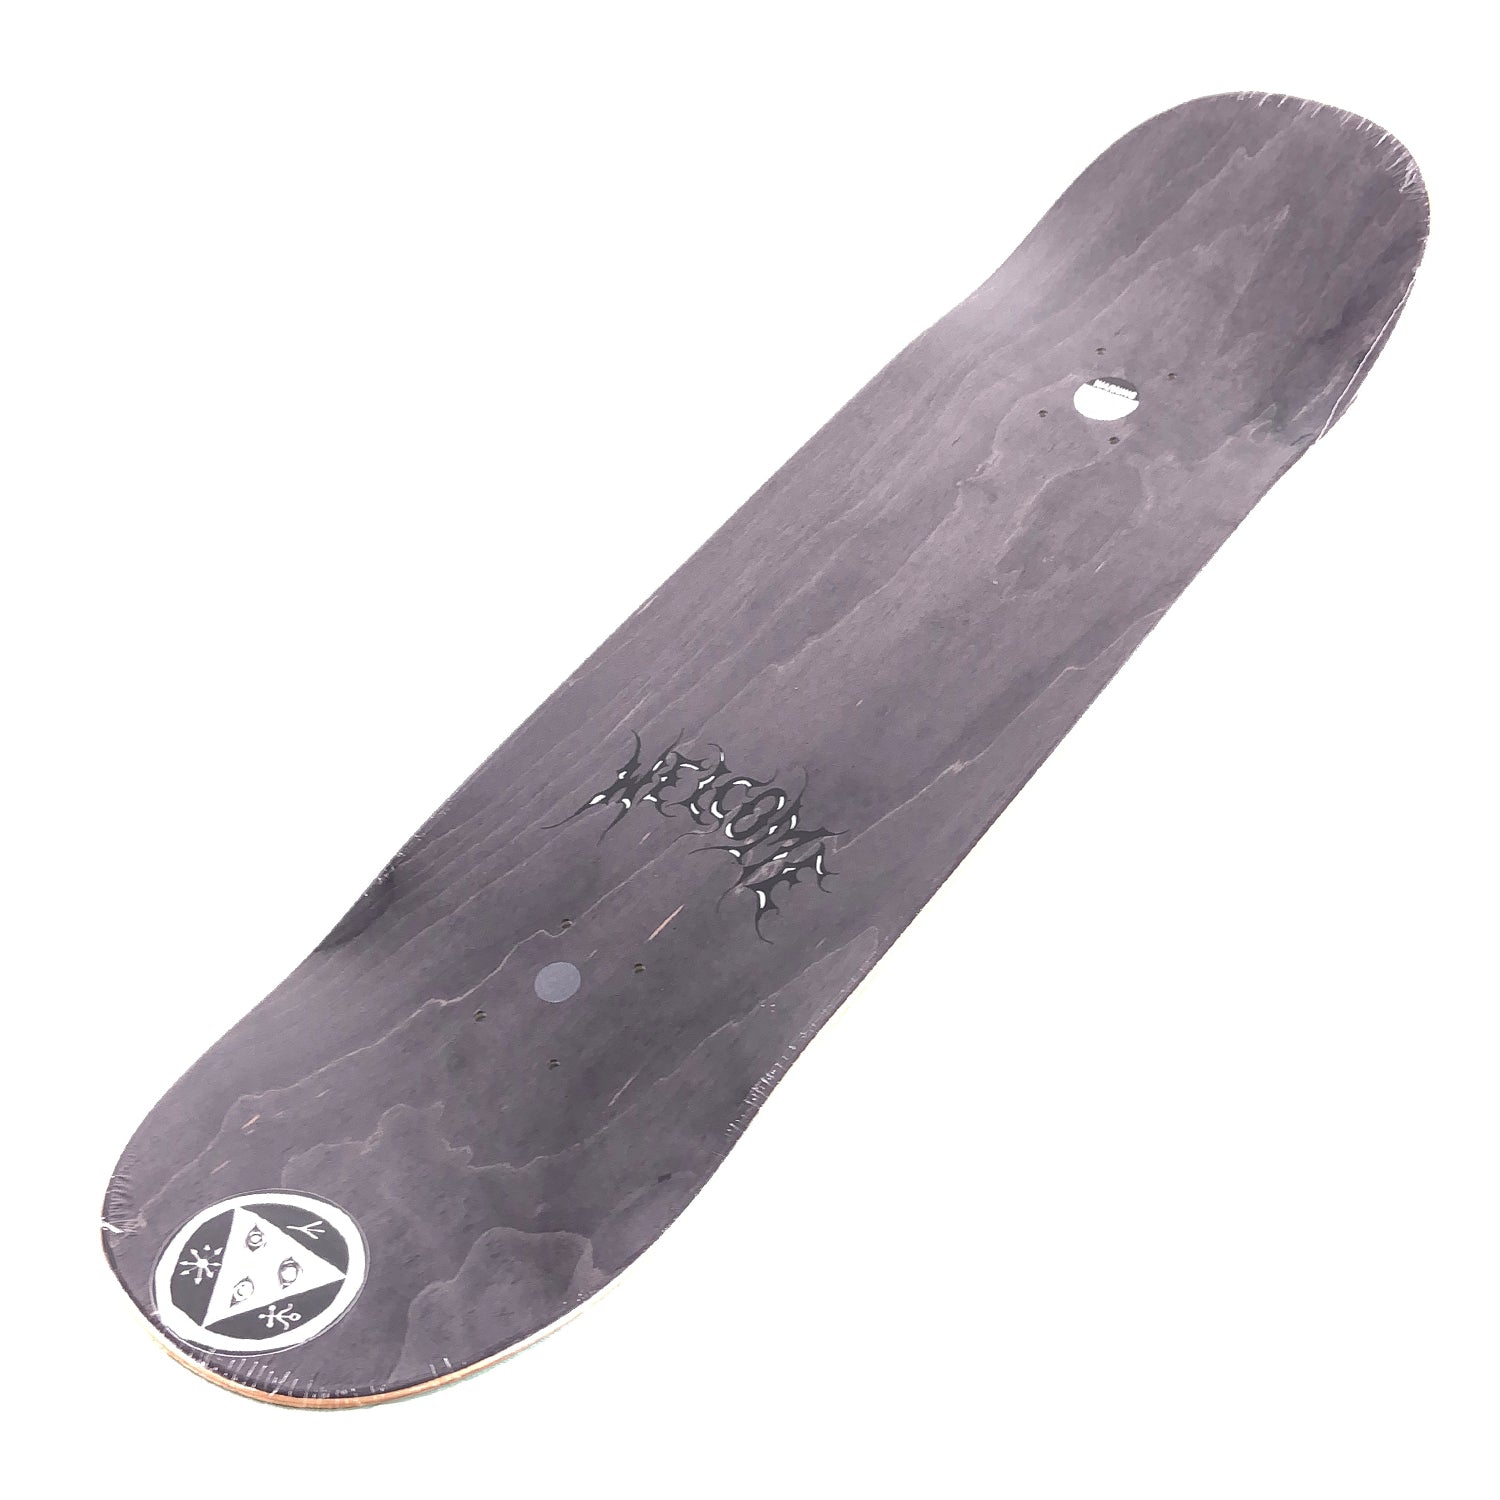 Welcome Ryan Townley Angel Pro Model on Enenra -Various Stains - 8.5" - Prime Delux Store